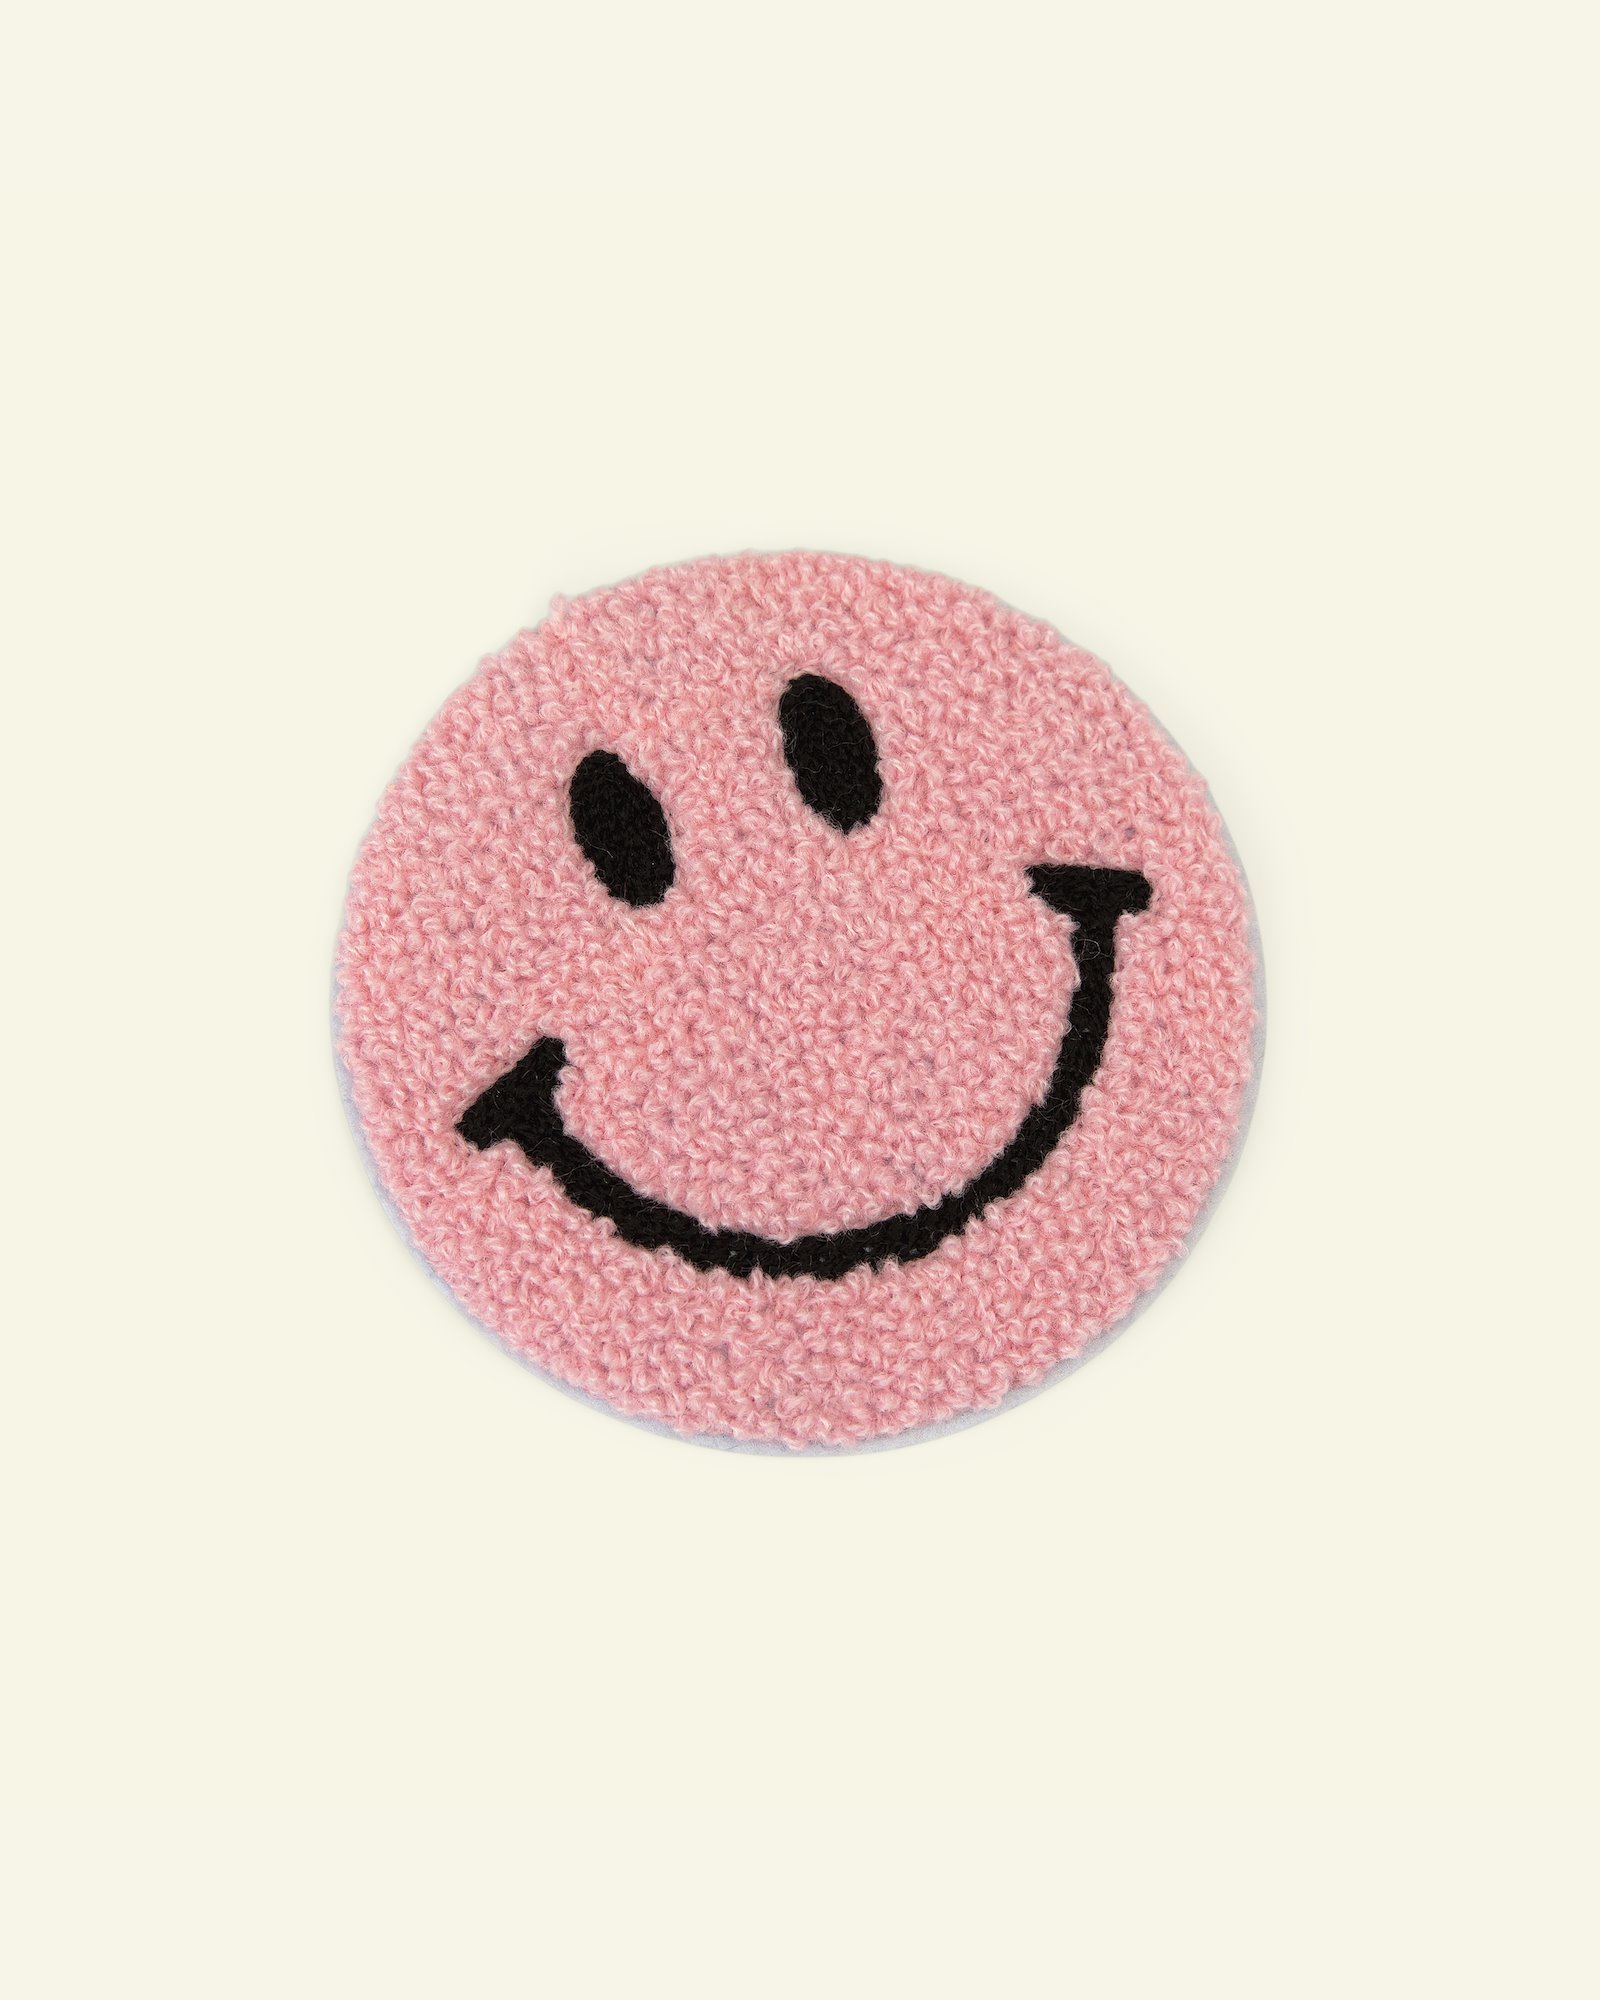 Patch smiley 9,5cm pink 1pcs 24926_pack